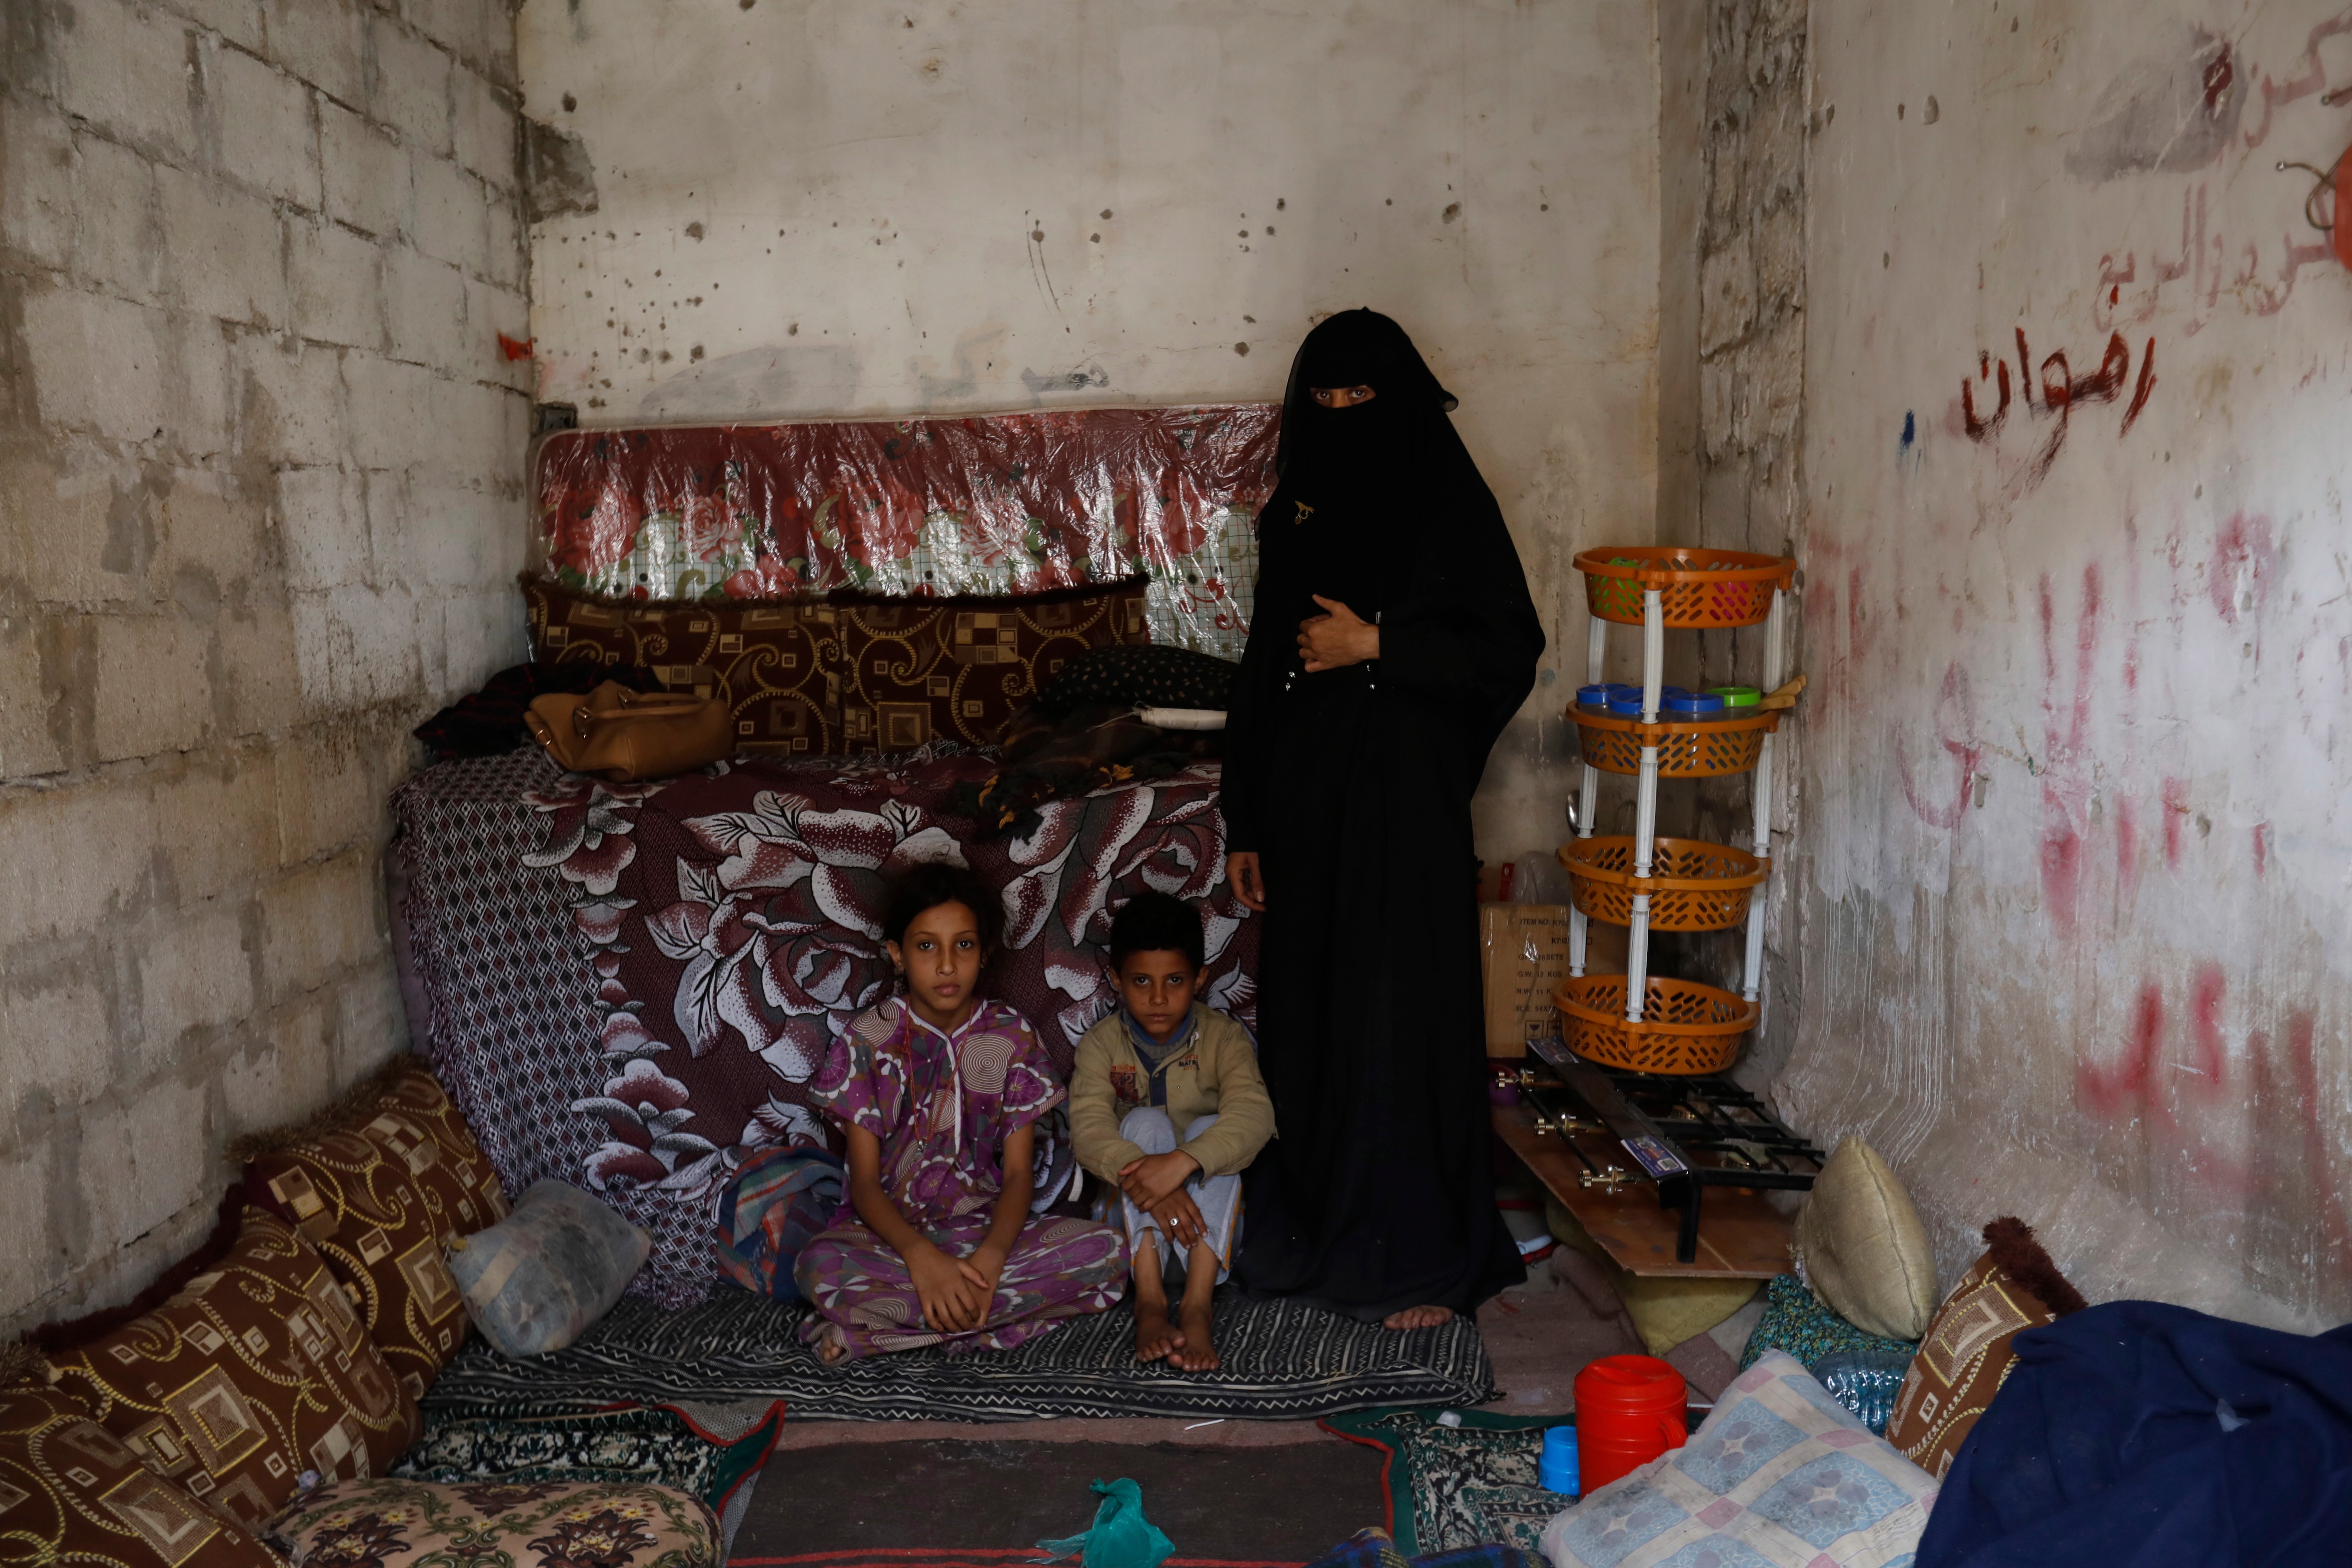 Conflict-affected members of a Yemeni family inside a one-room rental house, in Sanaa, Yemen.